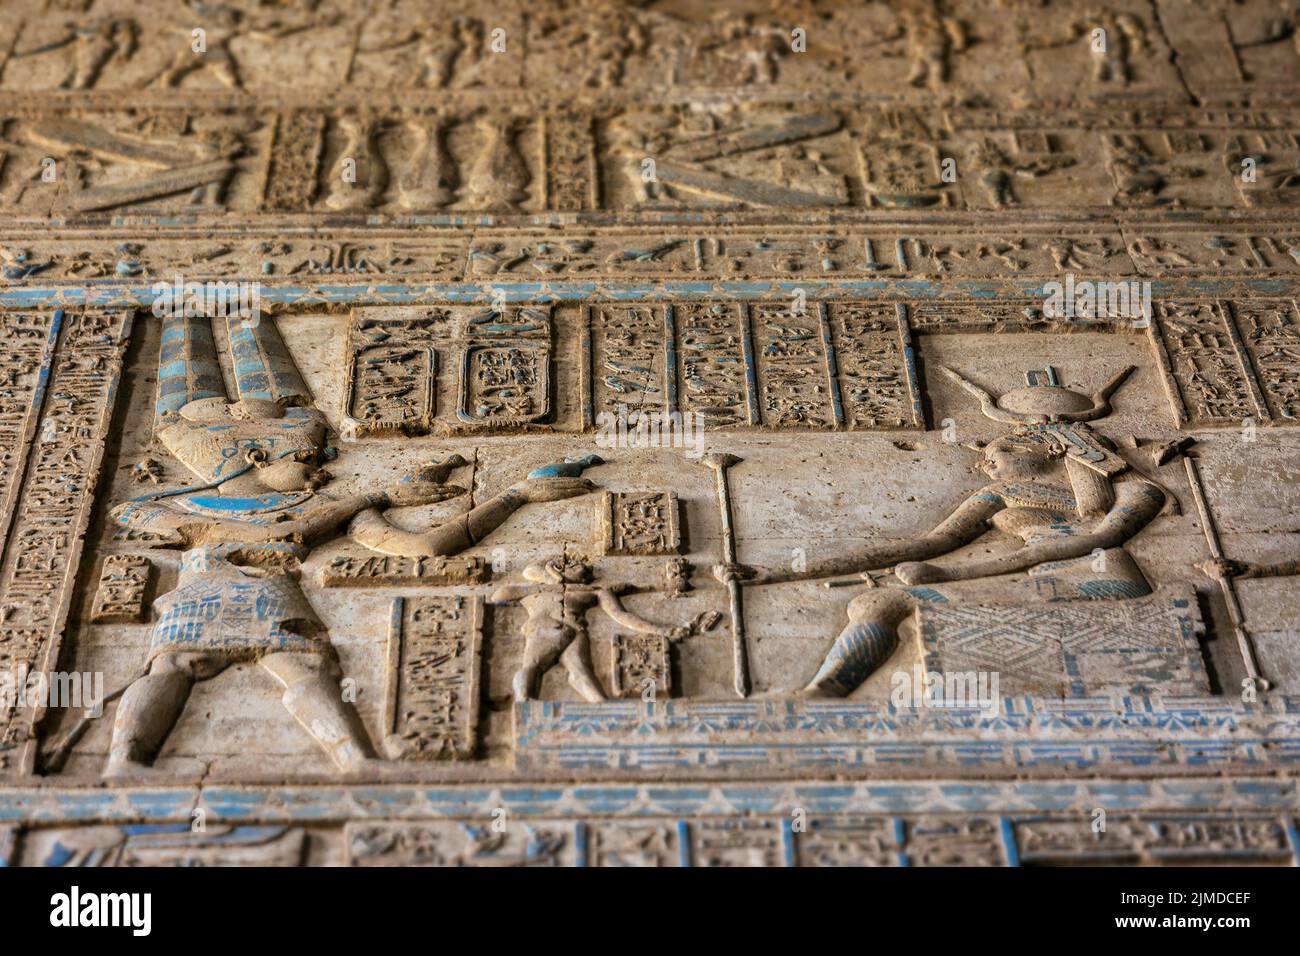 Hieroglyphic carvings in egyptian temple Stock Photo